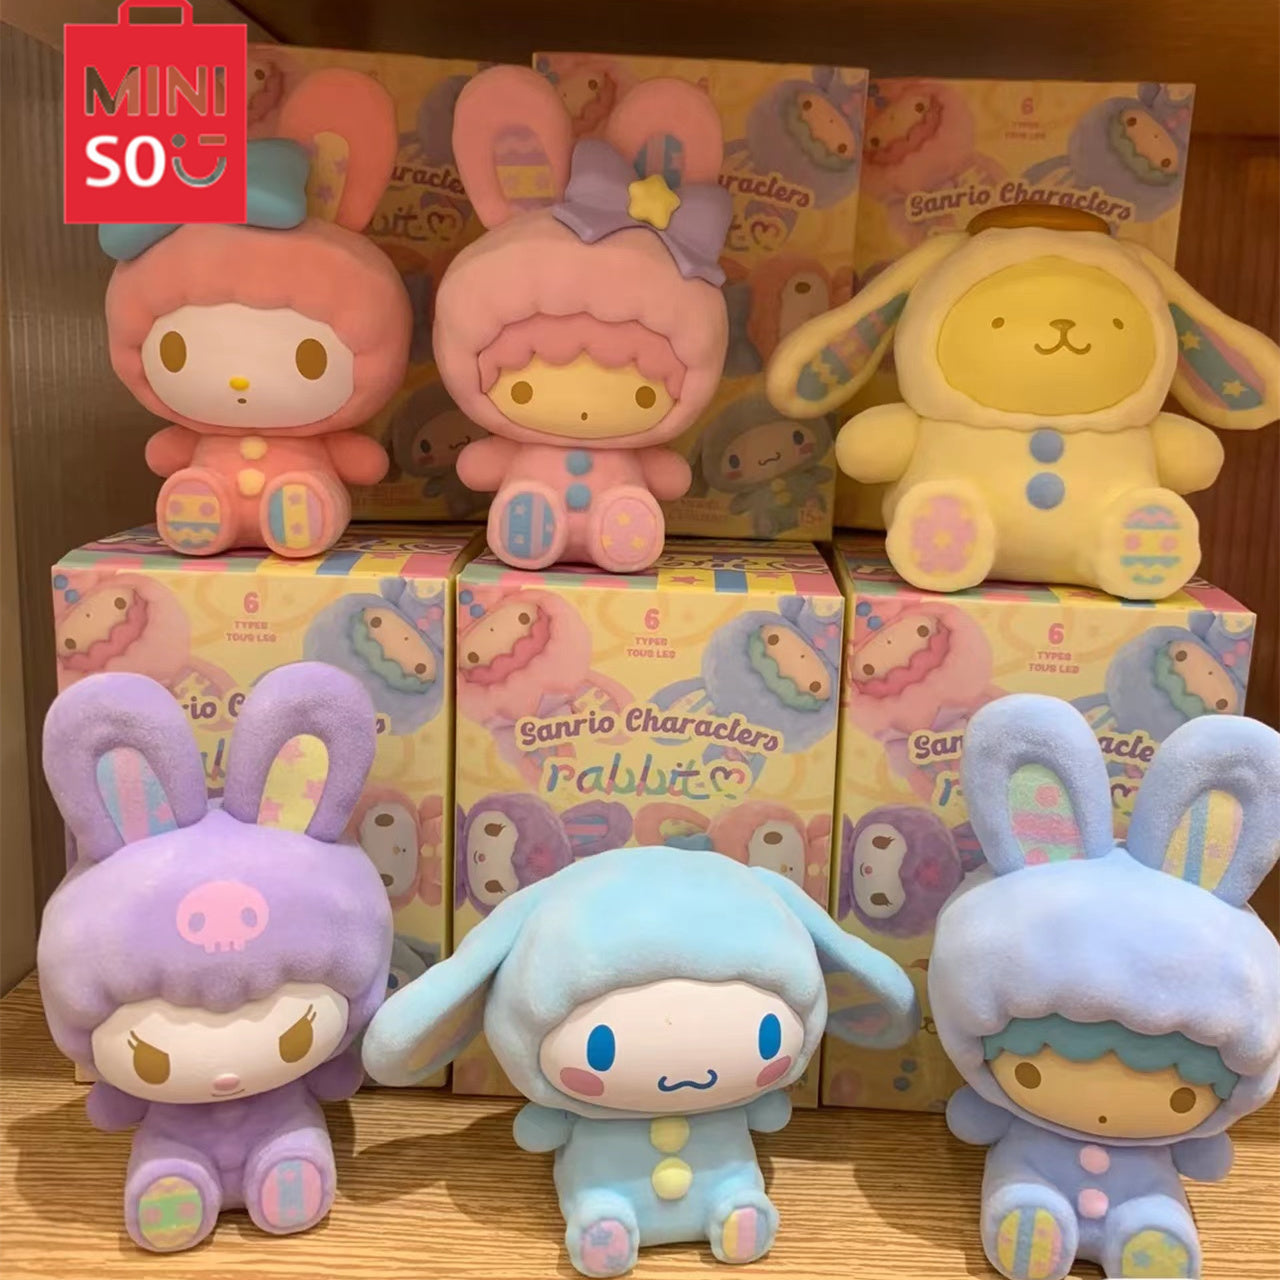 Sanrio Rabbit Blind Box Series featuring a variety of plush toys, including a purple stuffed animal with a skull, a toy with bunny ears, and more.